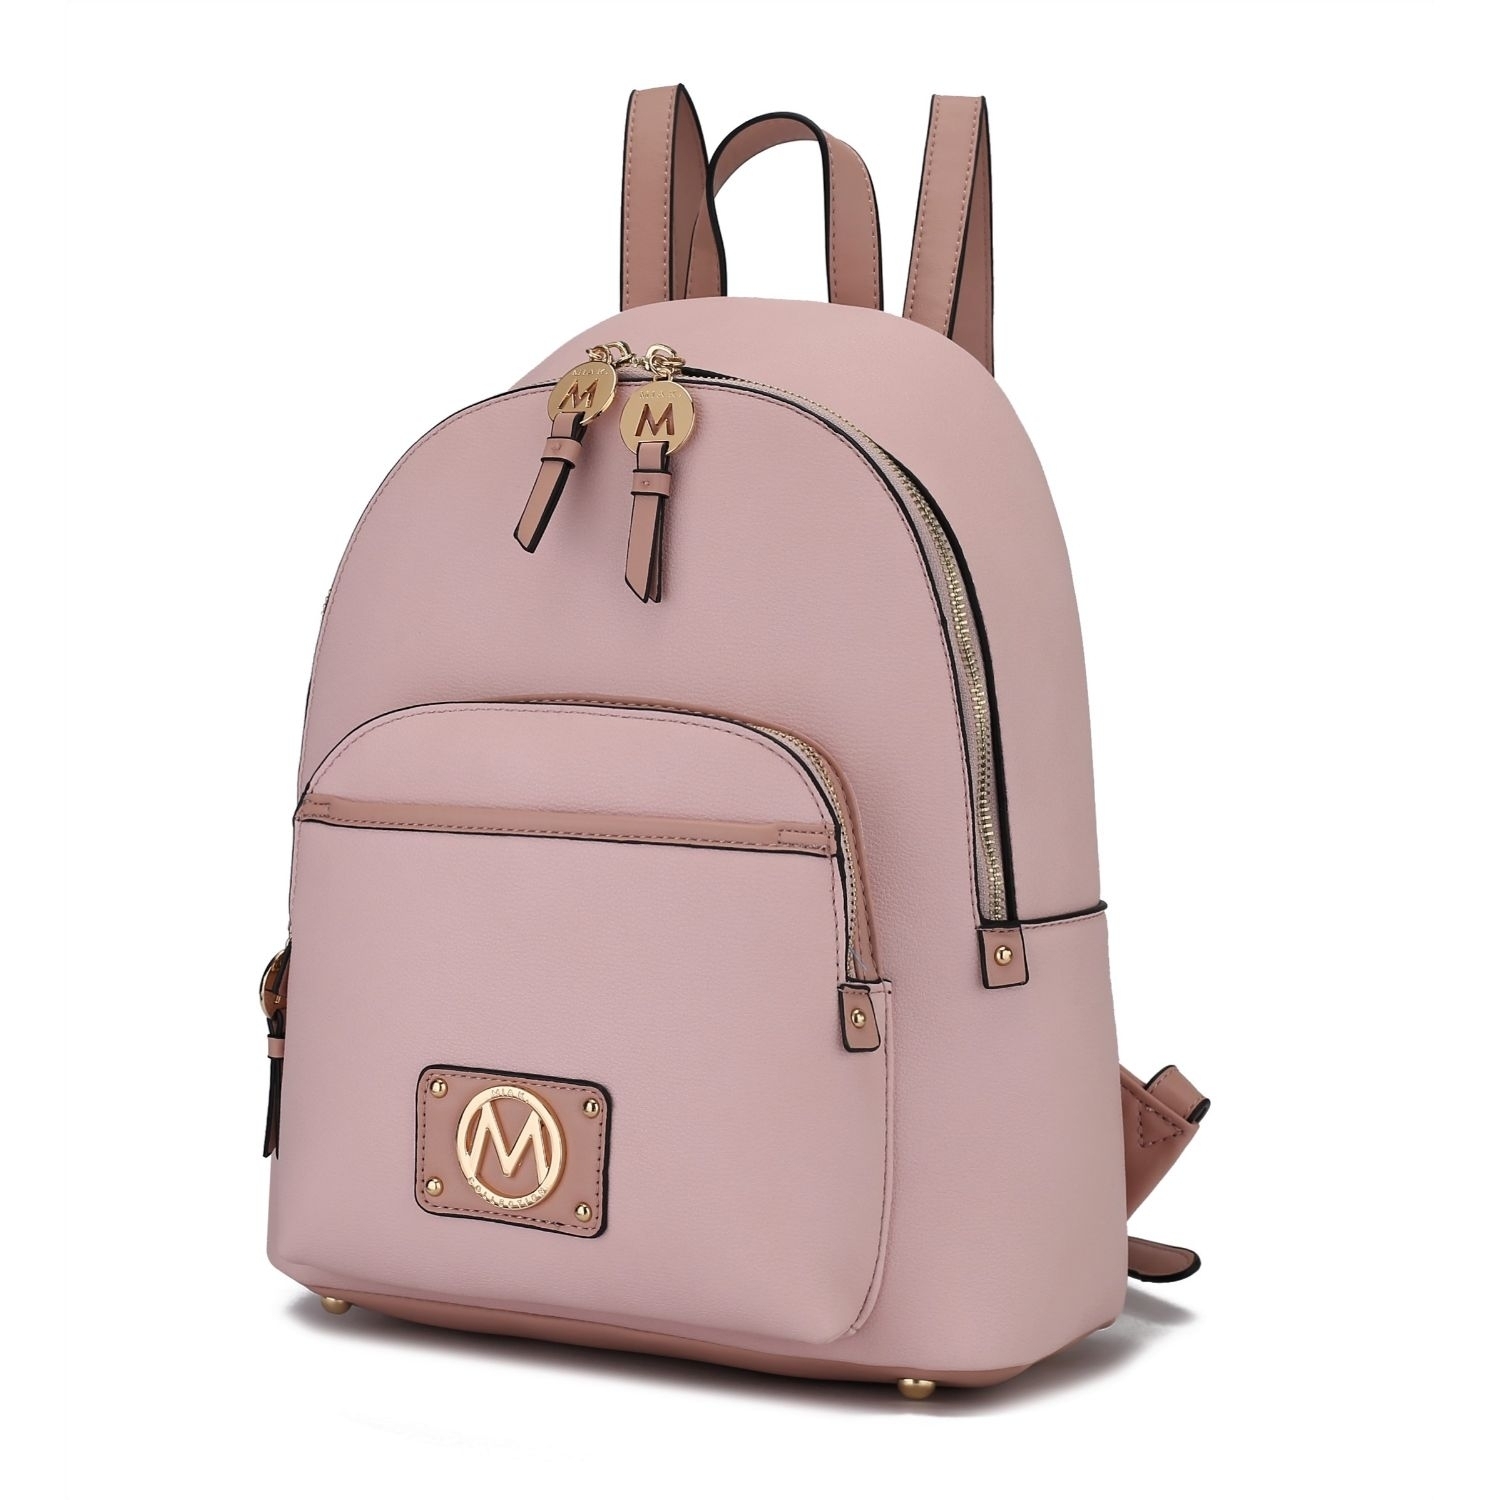 MKF Collection Alice Backpack By Mia K. - Light Blue